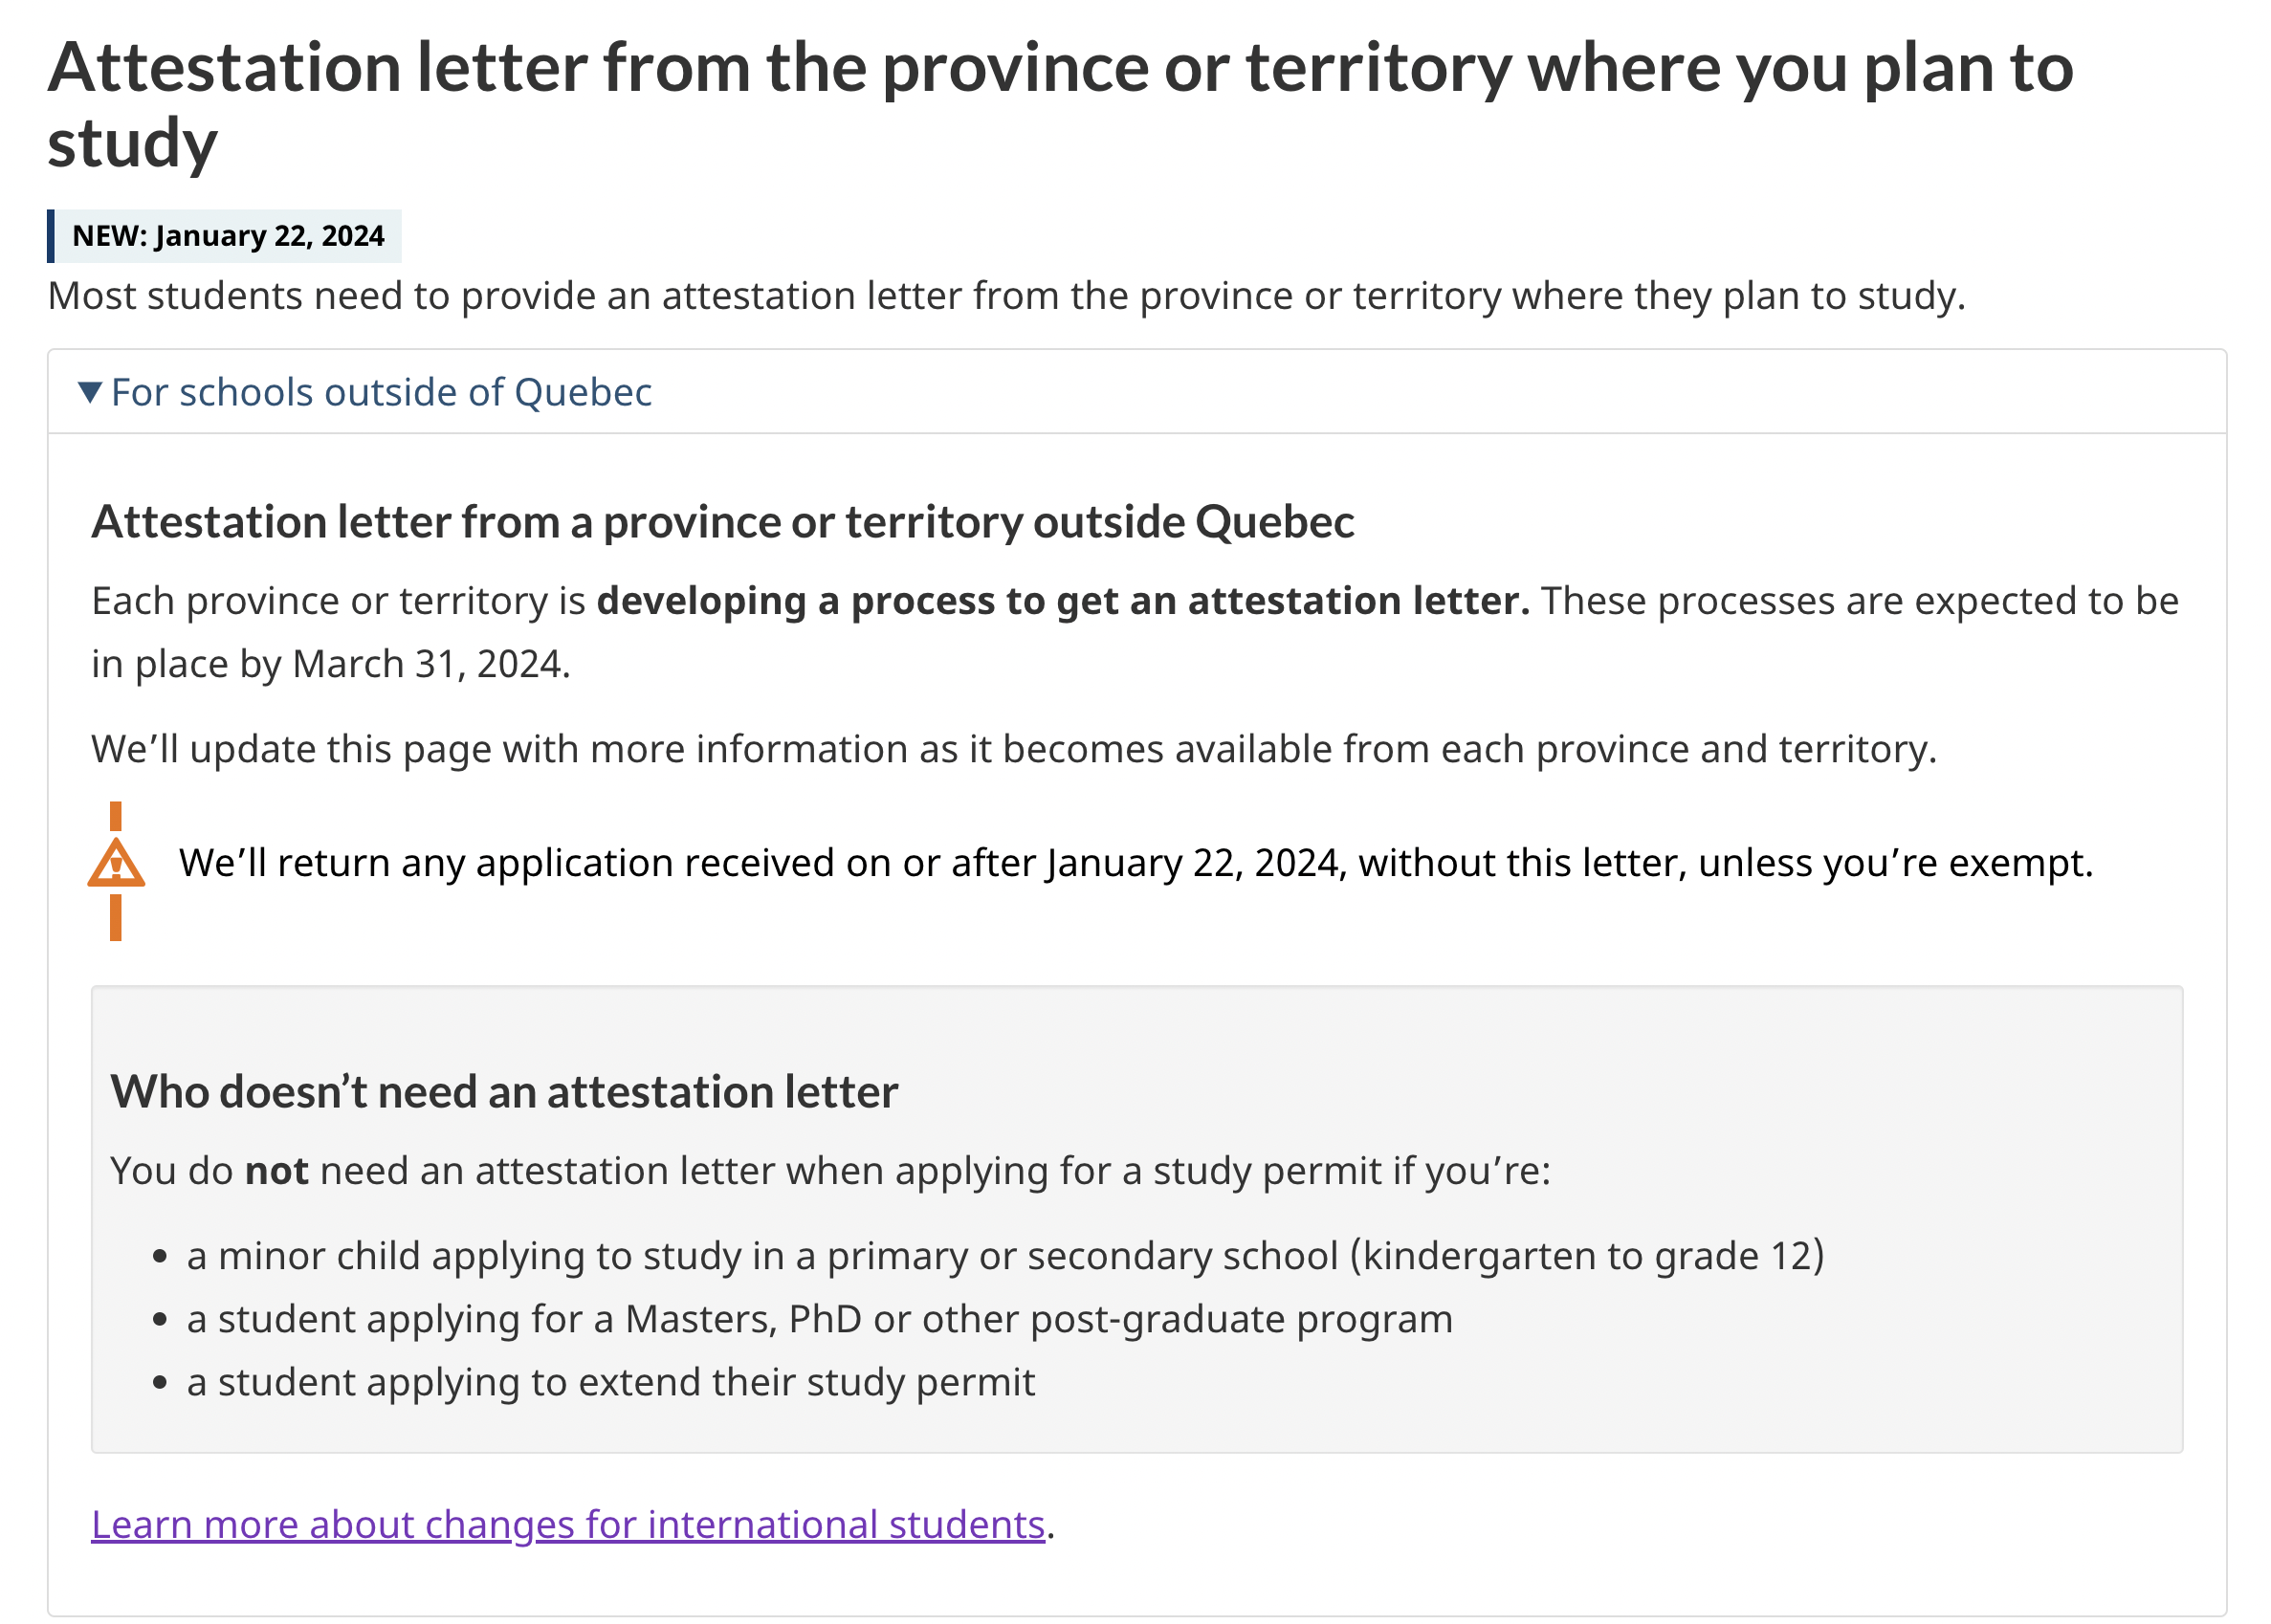 Attestation Letters from Provinces or Territories will be required | IRCC 2024 updates on Student Permit